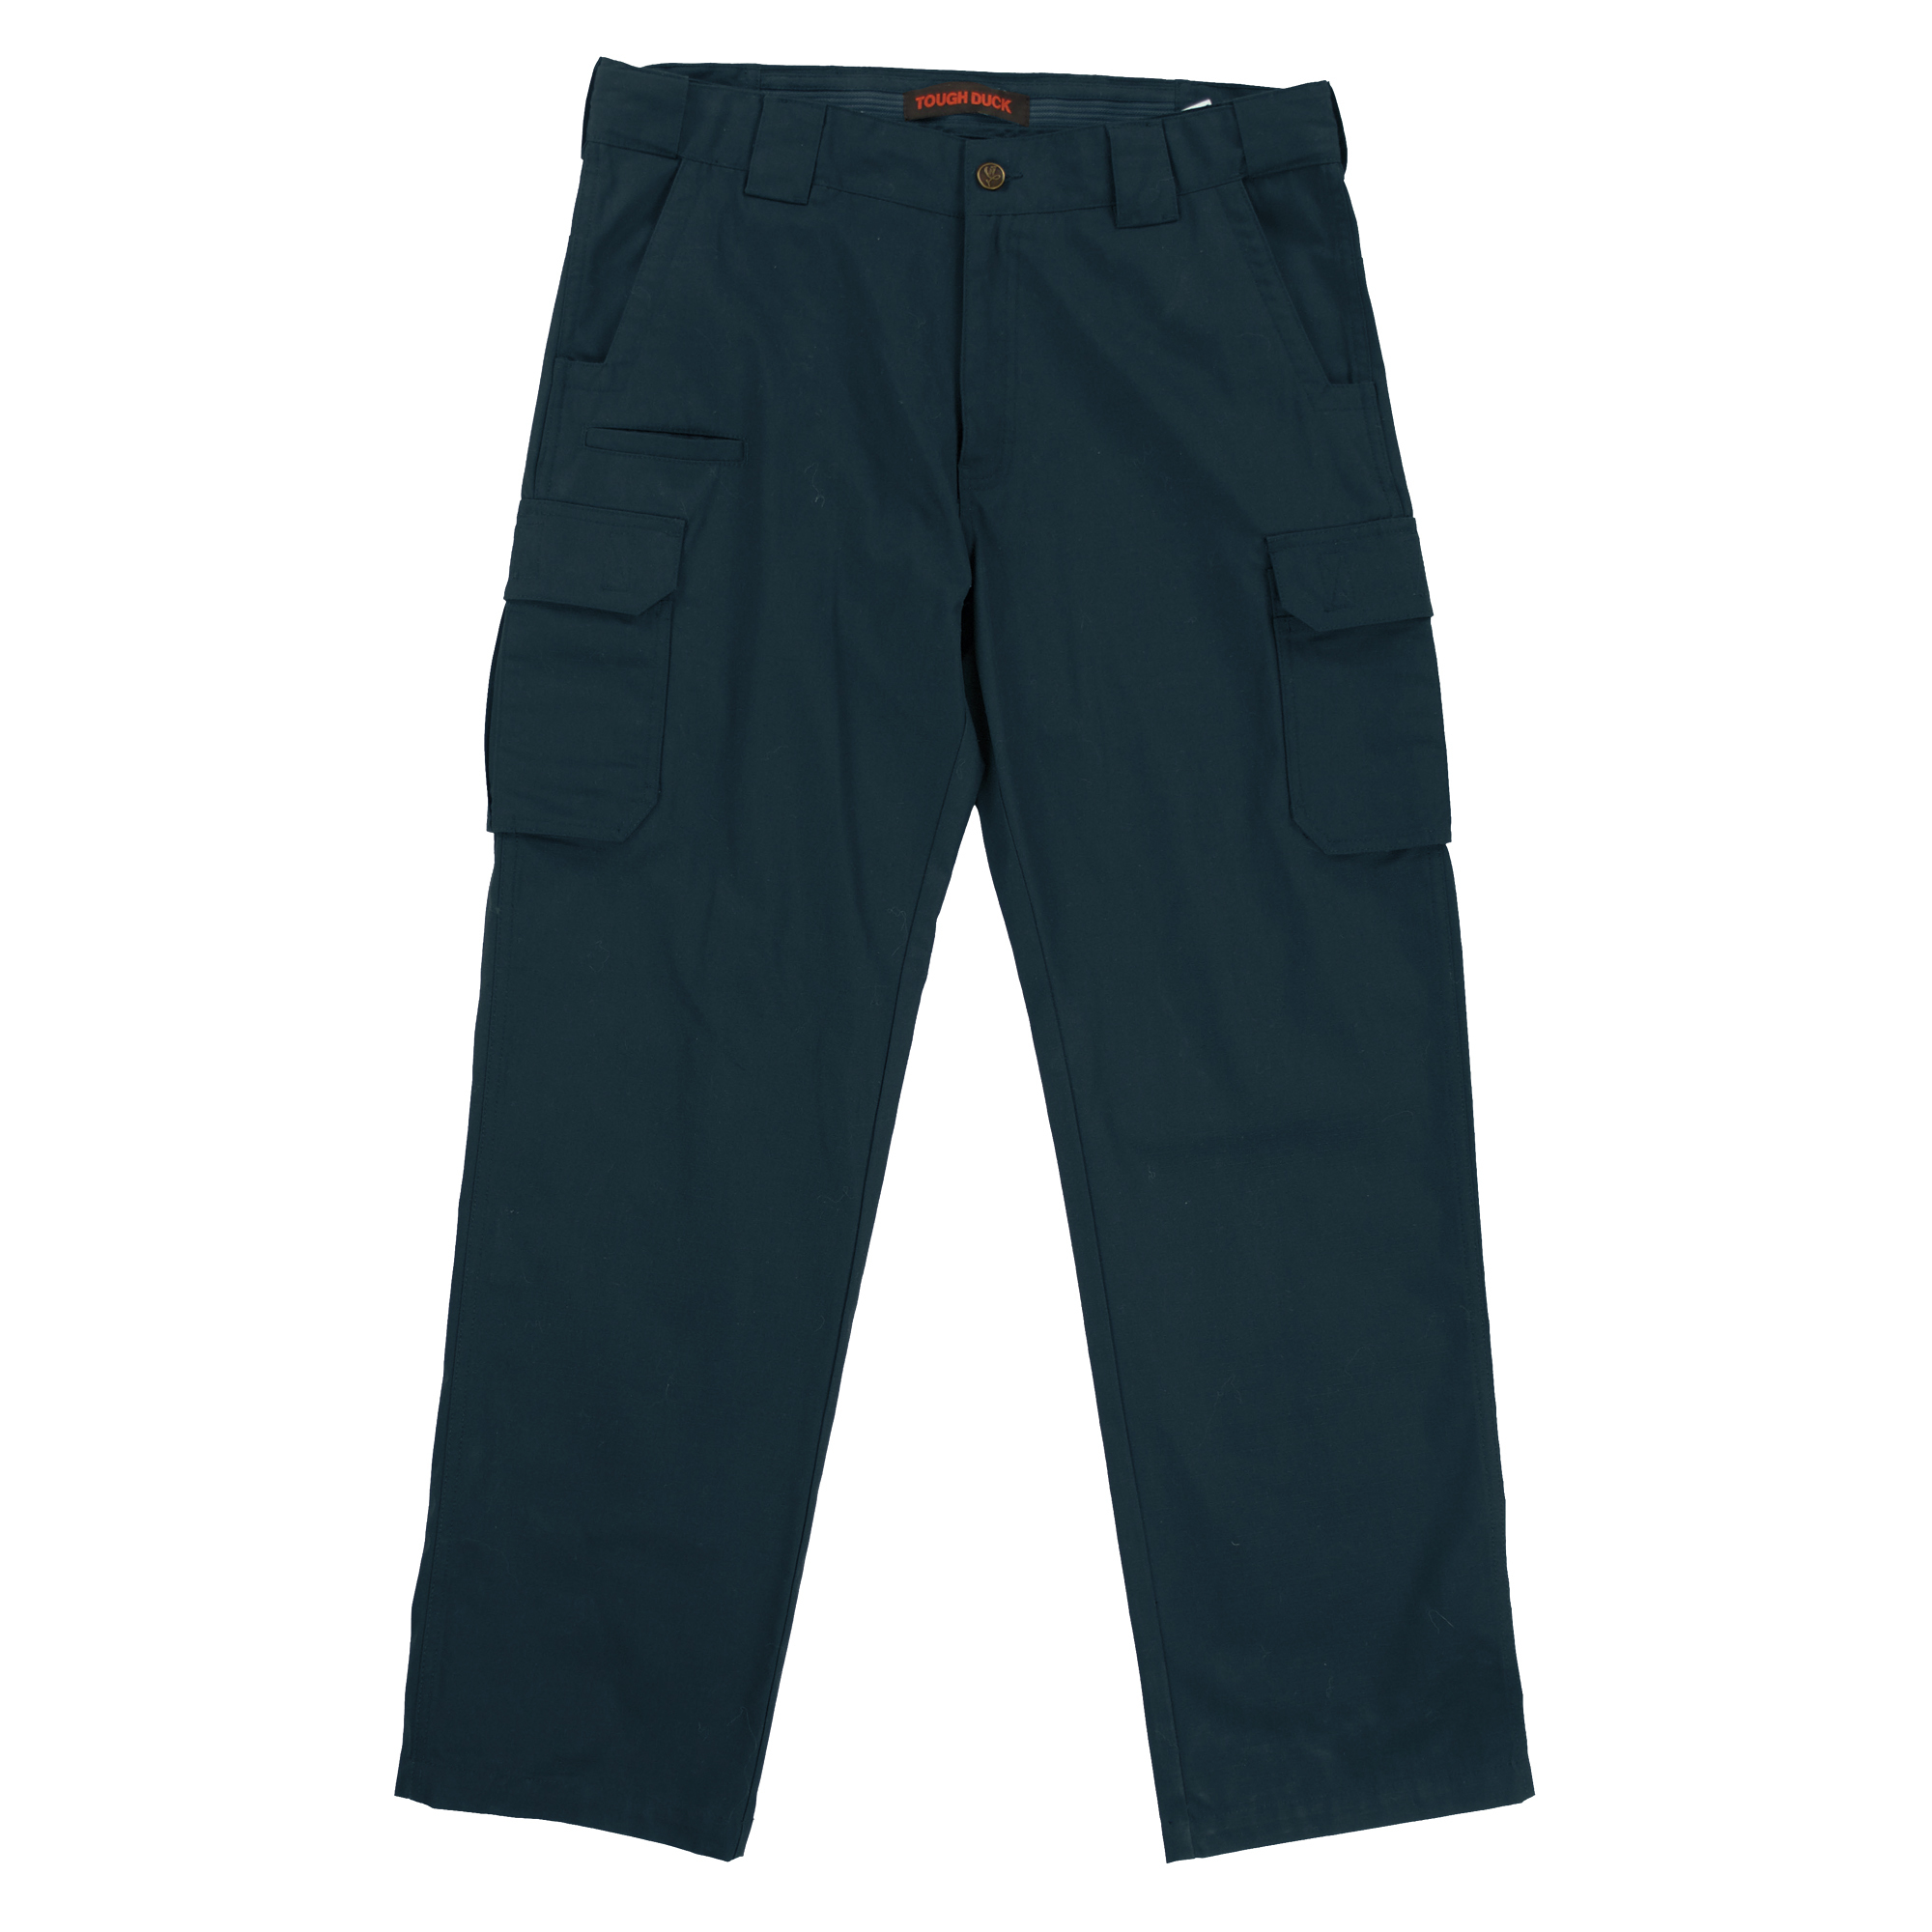 Tough Duck, Ripstop Cargo Pant, Waist 38 in, Inseam 30 in, Color Navy, Model WP110